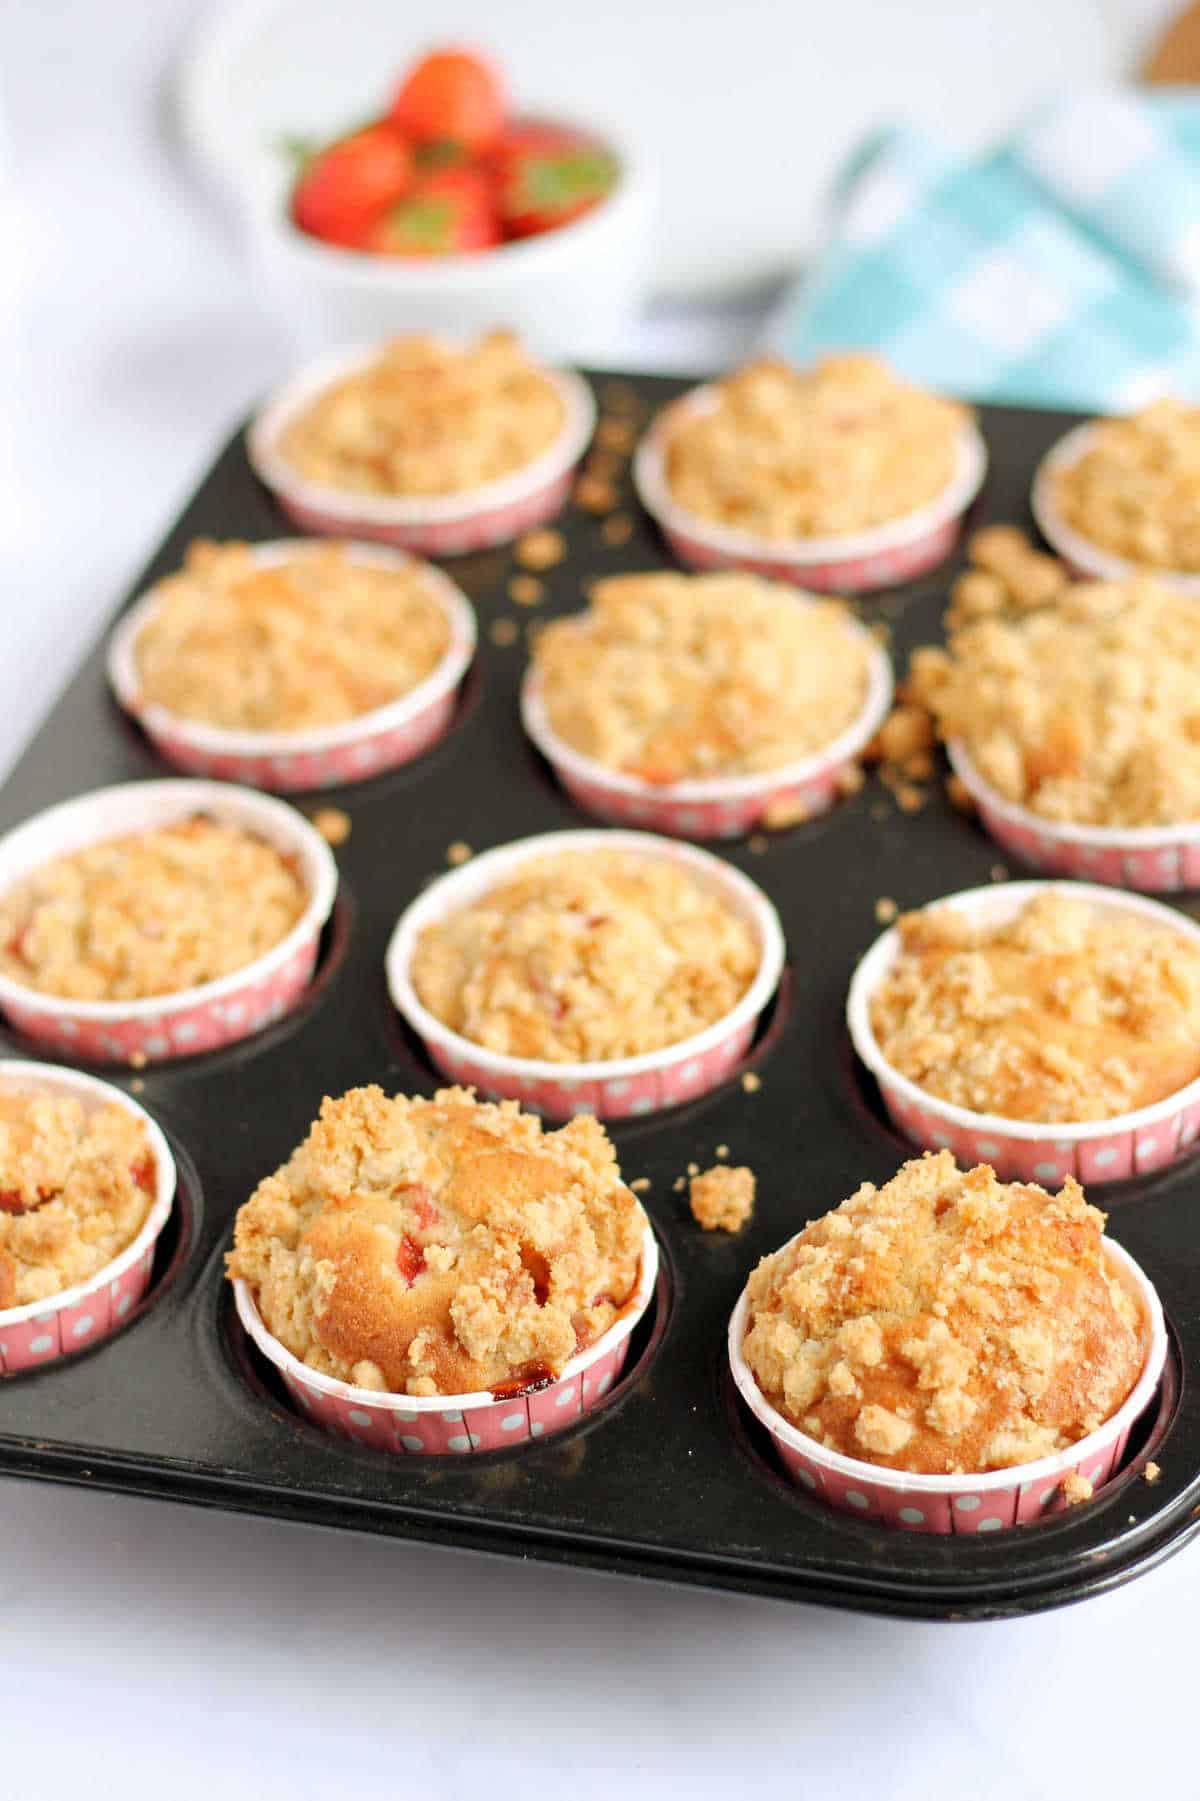 Muffins in a muffin tin, just out of the oven.